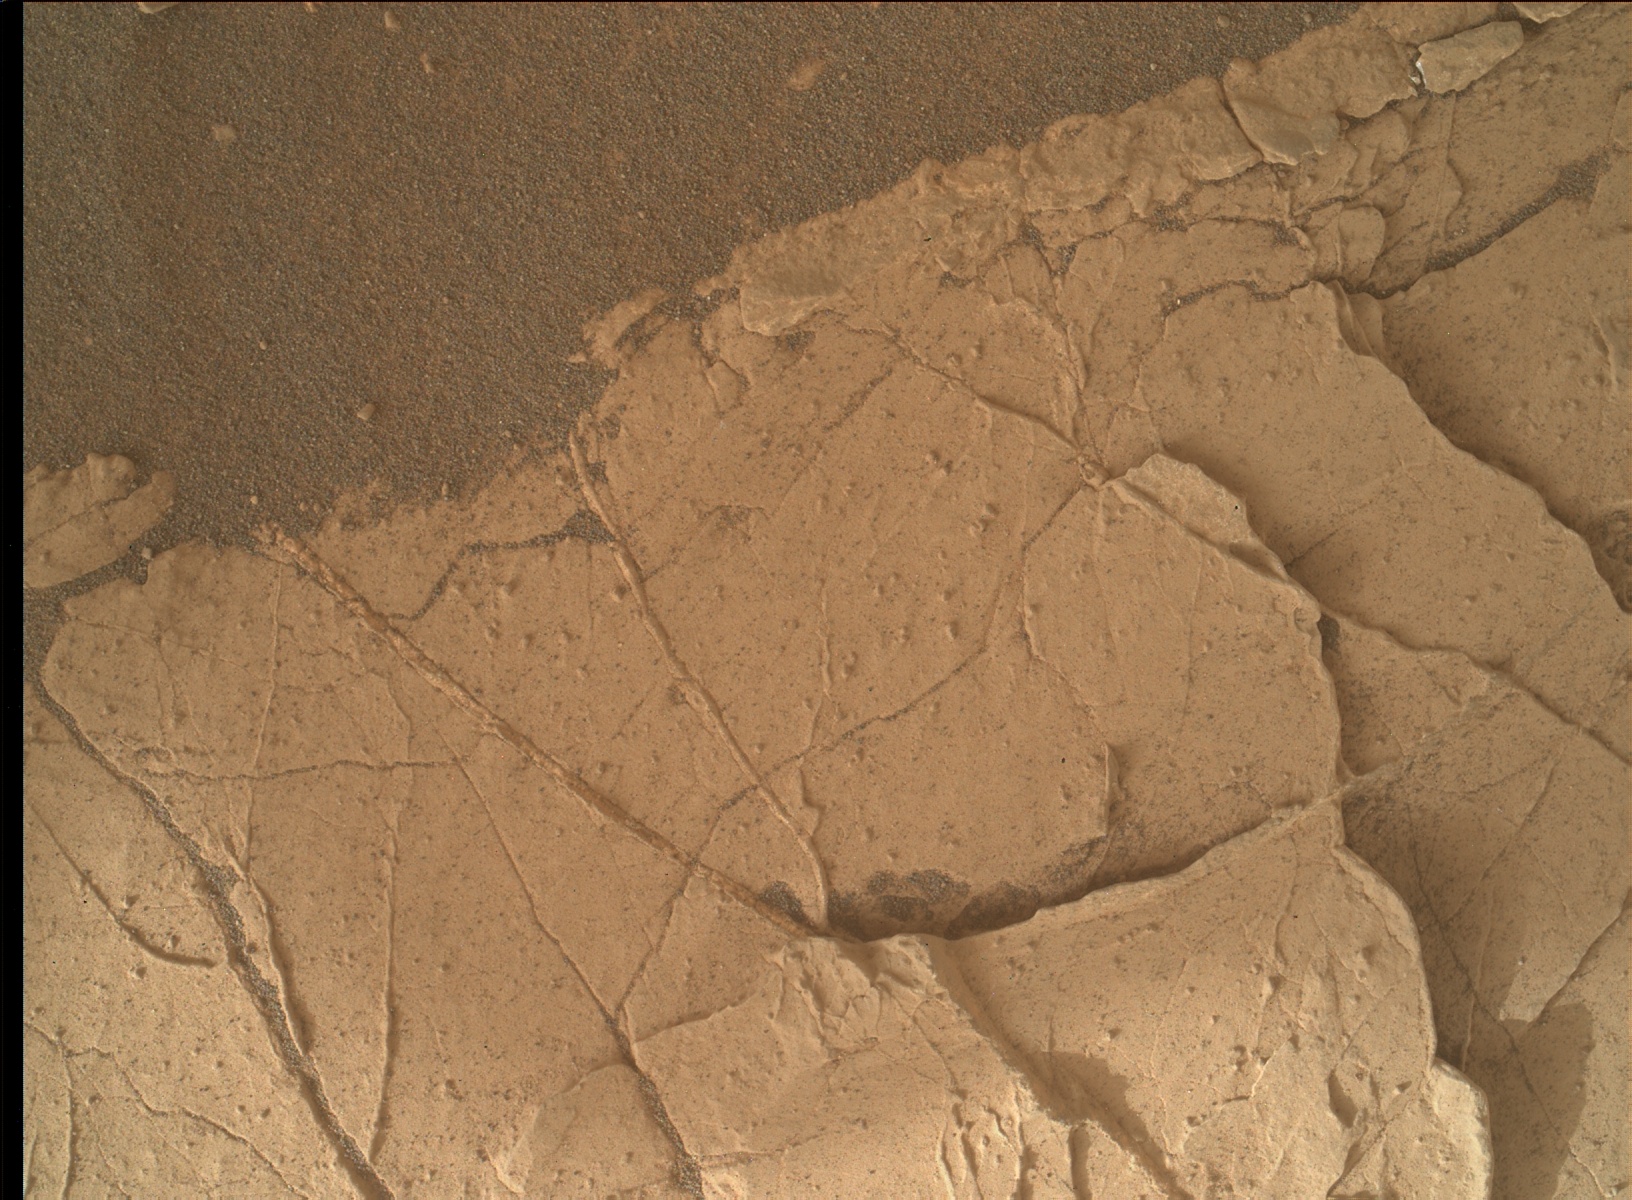 Nasa's Mars rover Curiosity acquired this image using its Mars Hand Lens Imager (MAHLI) on Sol 3069